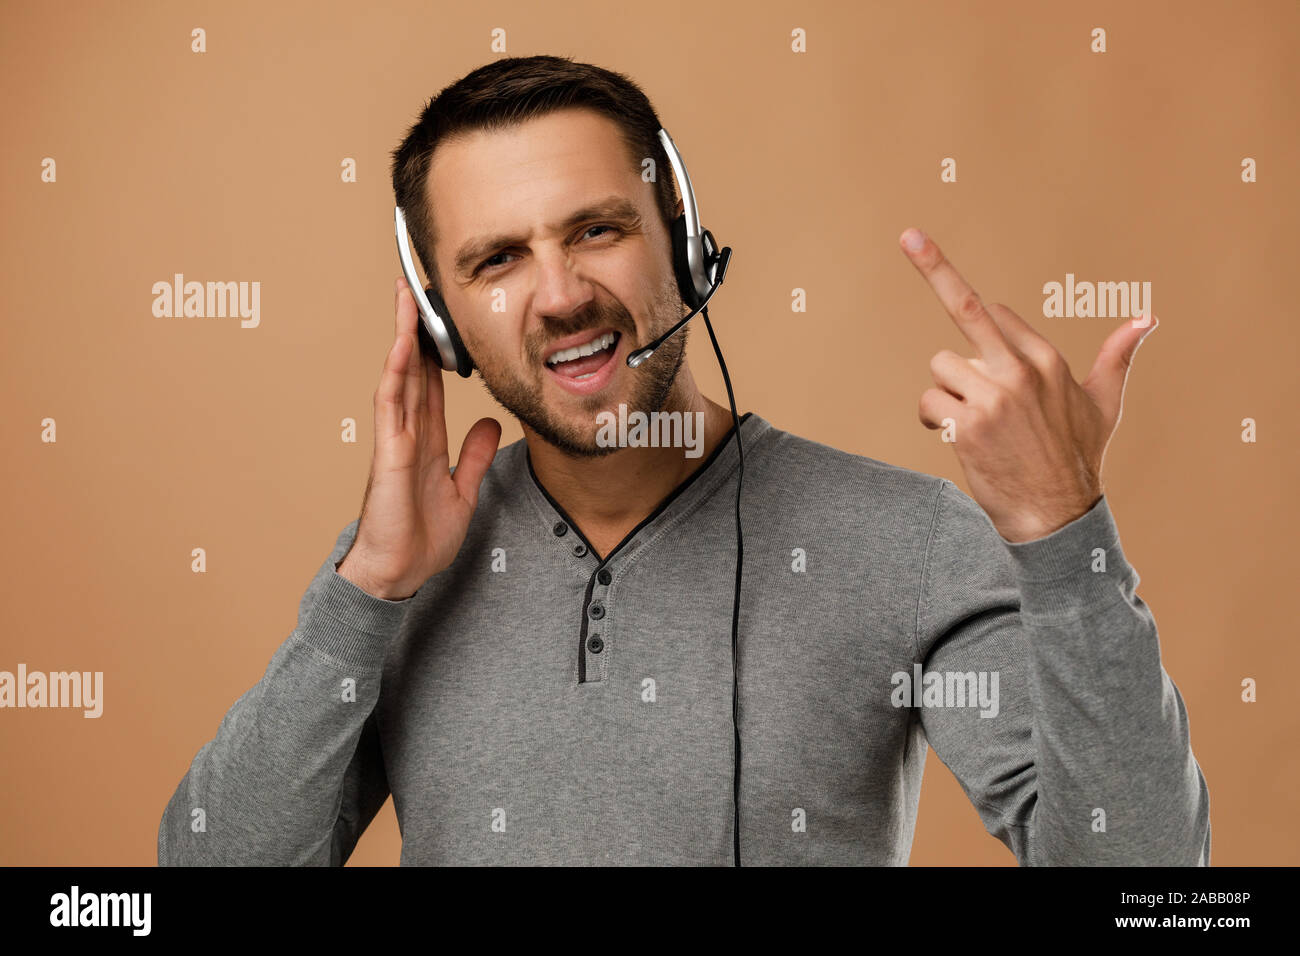 indignant unrestrained call center worker man isolated on beige background. Young angry employee telesales agent using headset. Stock Photo